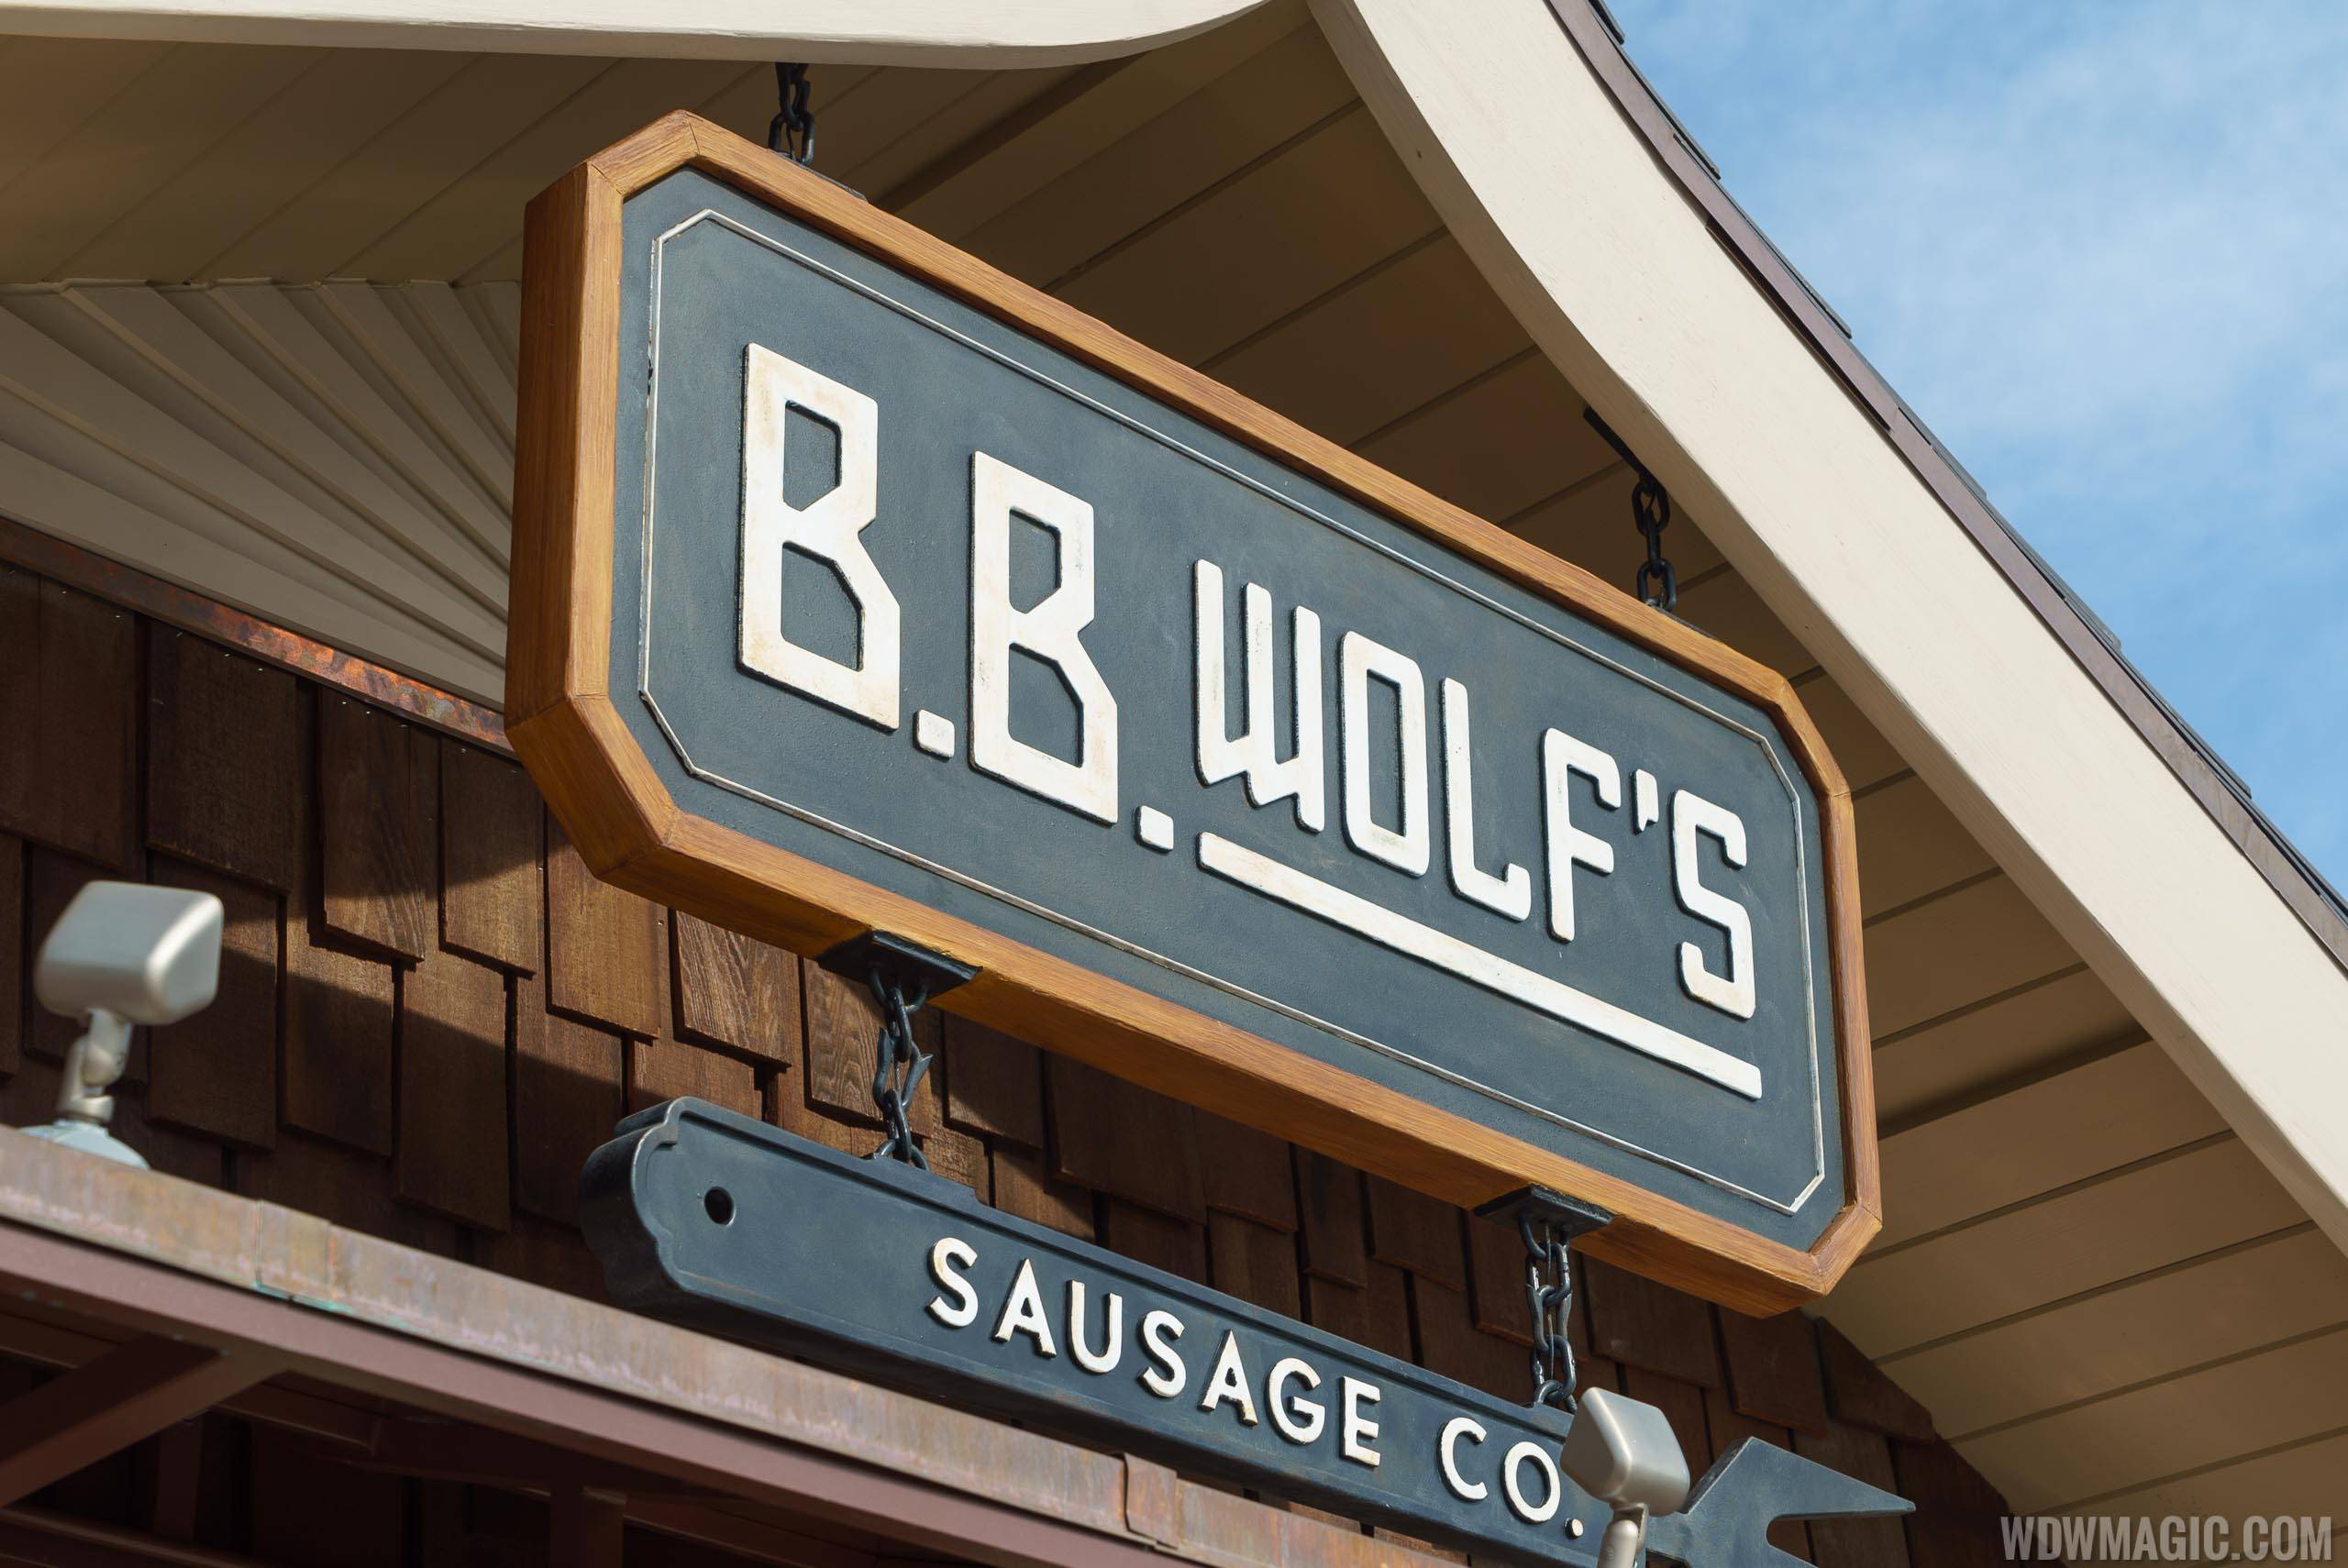 B.B. Wolf's Sausage Co. overview